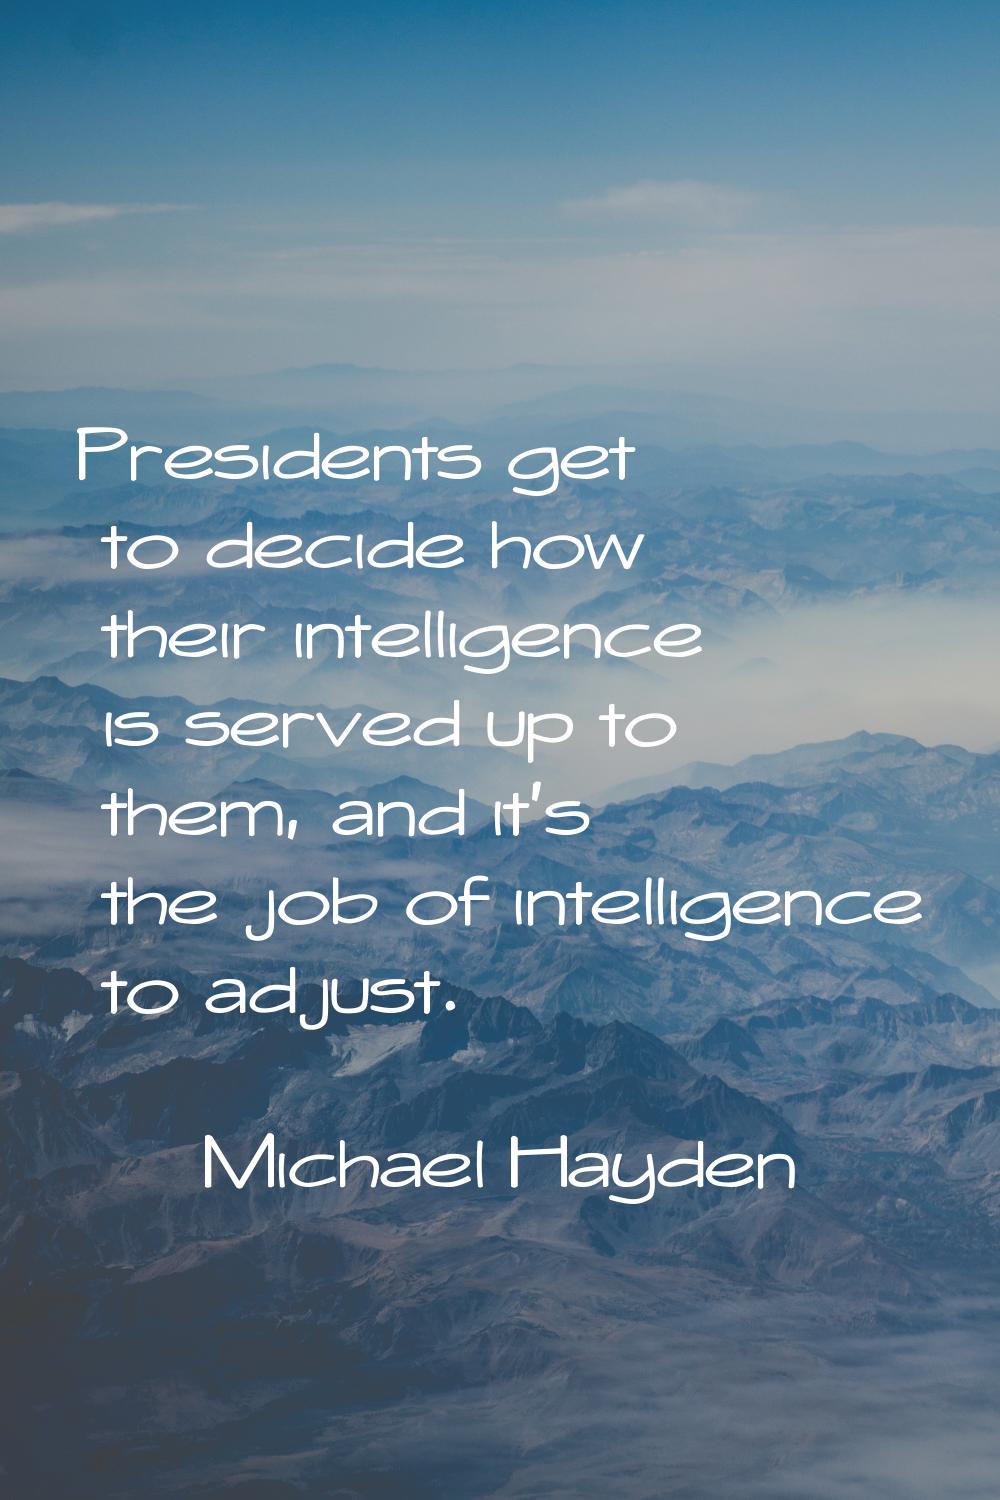 Presidents get to decide how their intelligence is served up to them, and it's the job of intellige